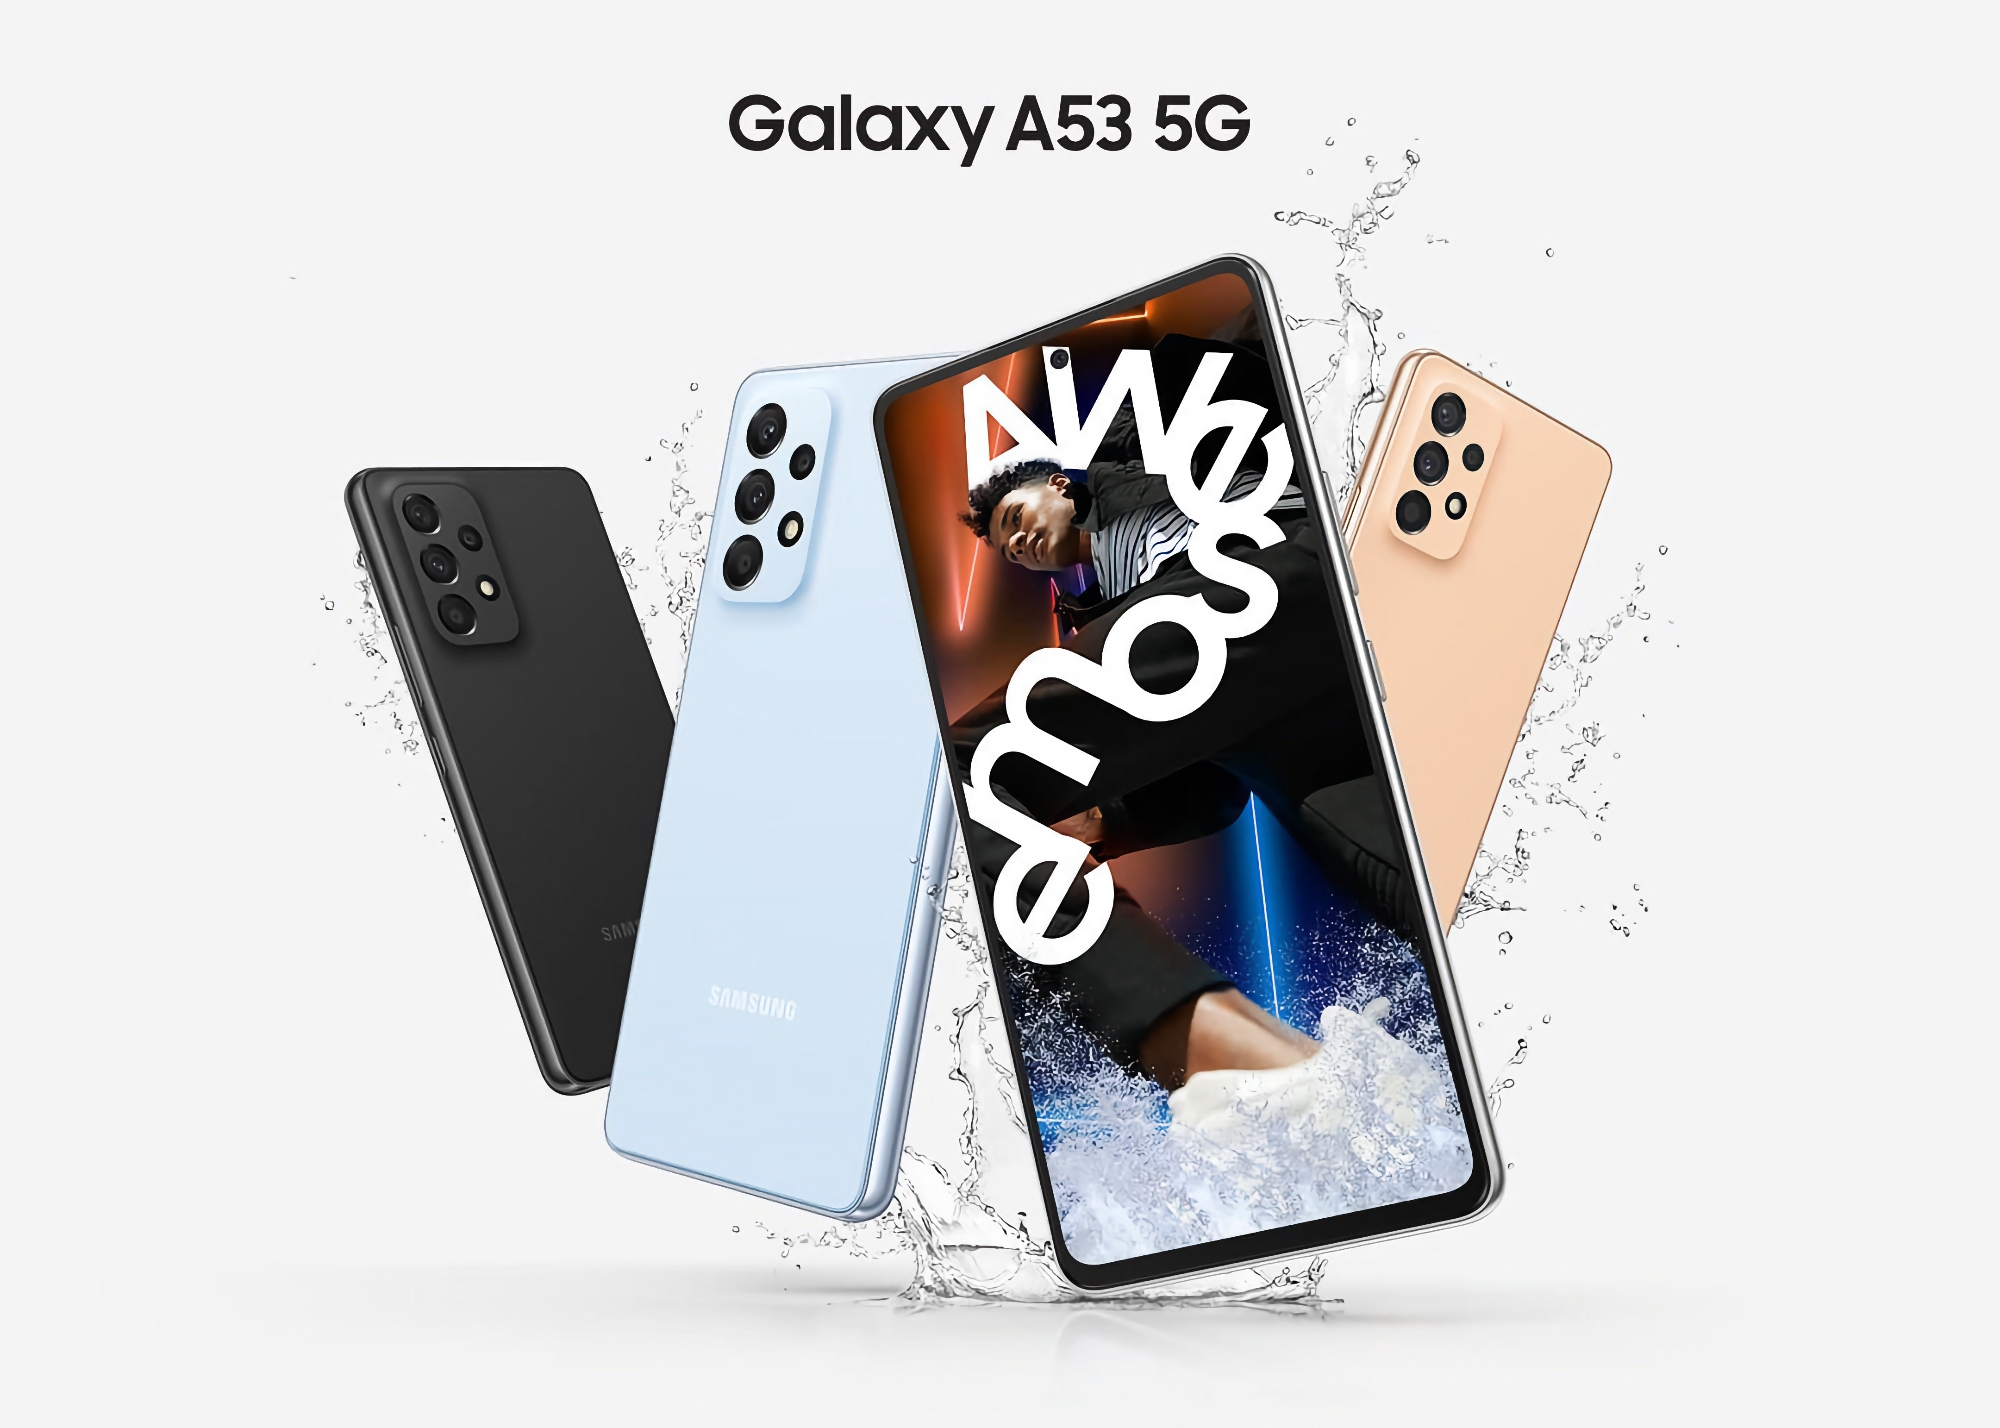 Following the Galaxy XCover 6 Pro: Samsung releases Android 13 for the Galaxy A53 5G in the US